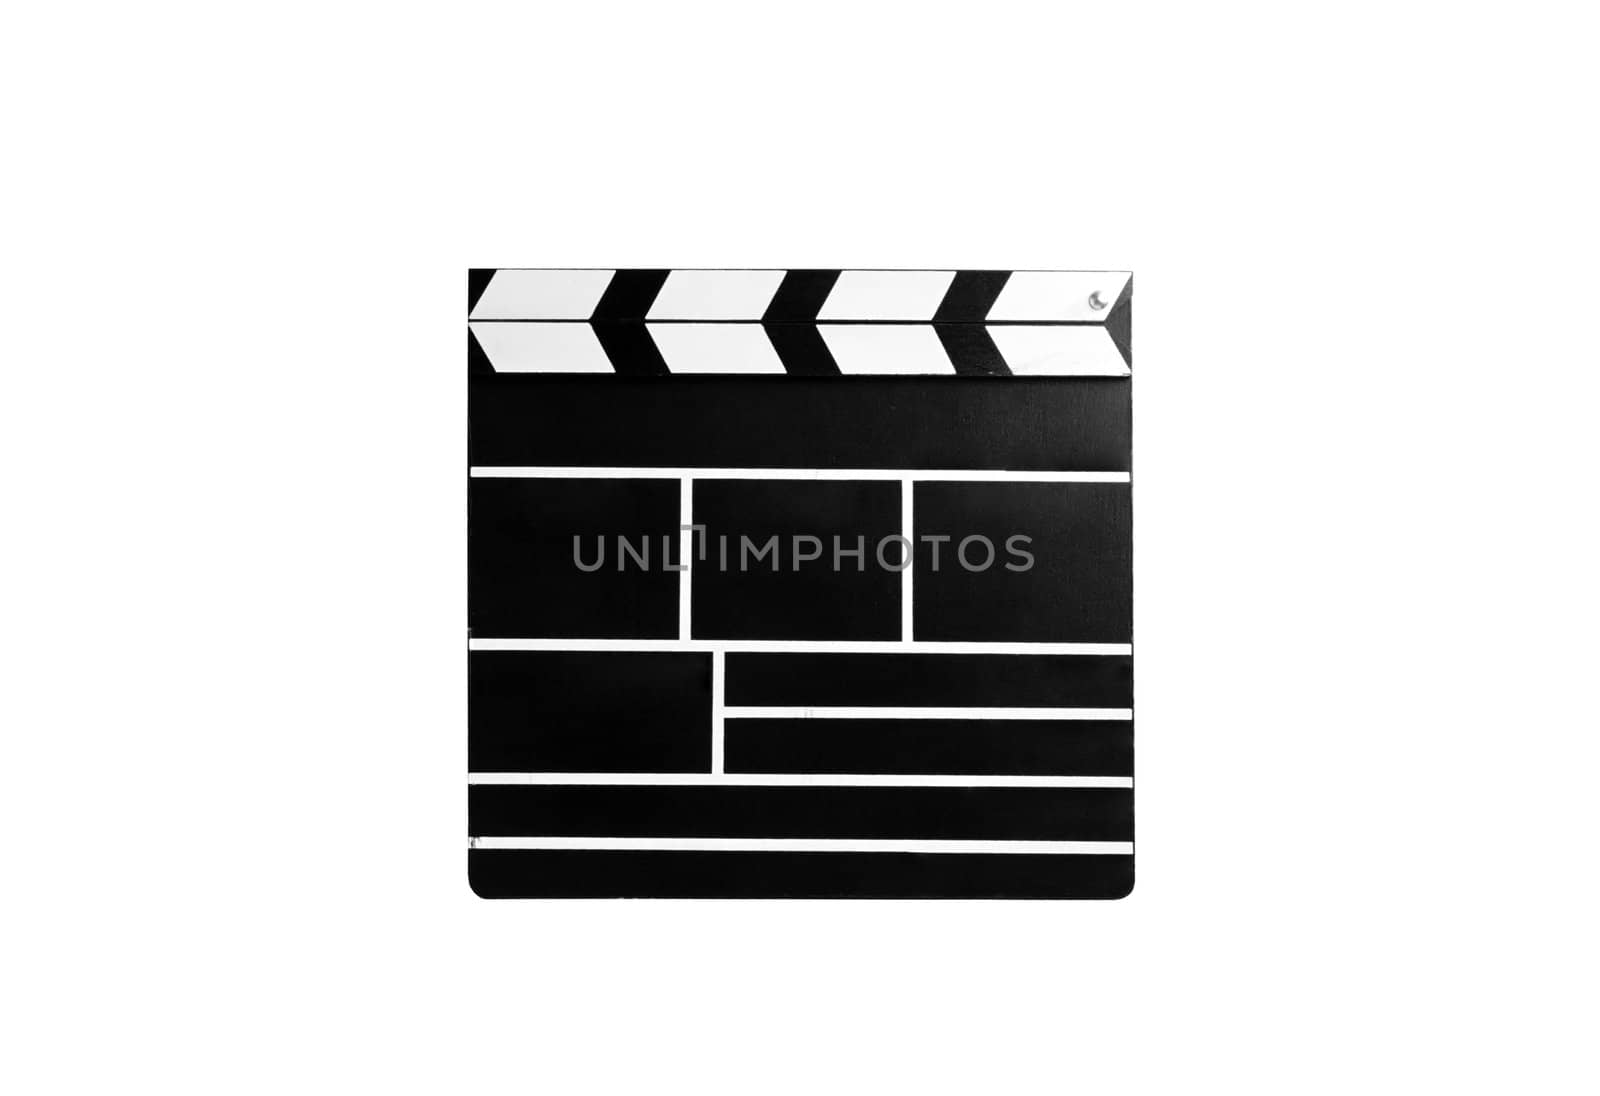 movie clapboard used by movie directors over white background